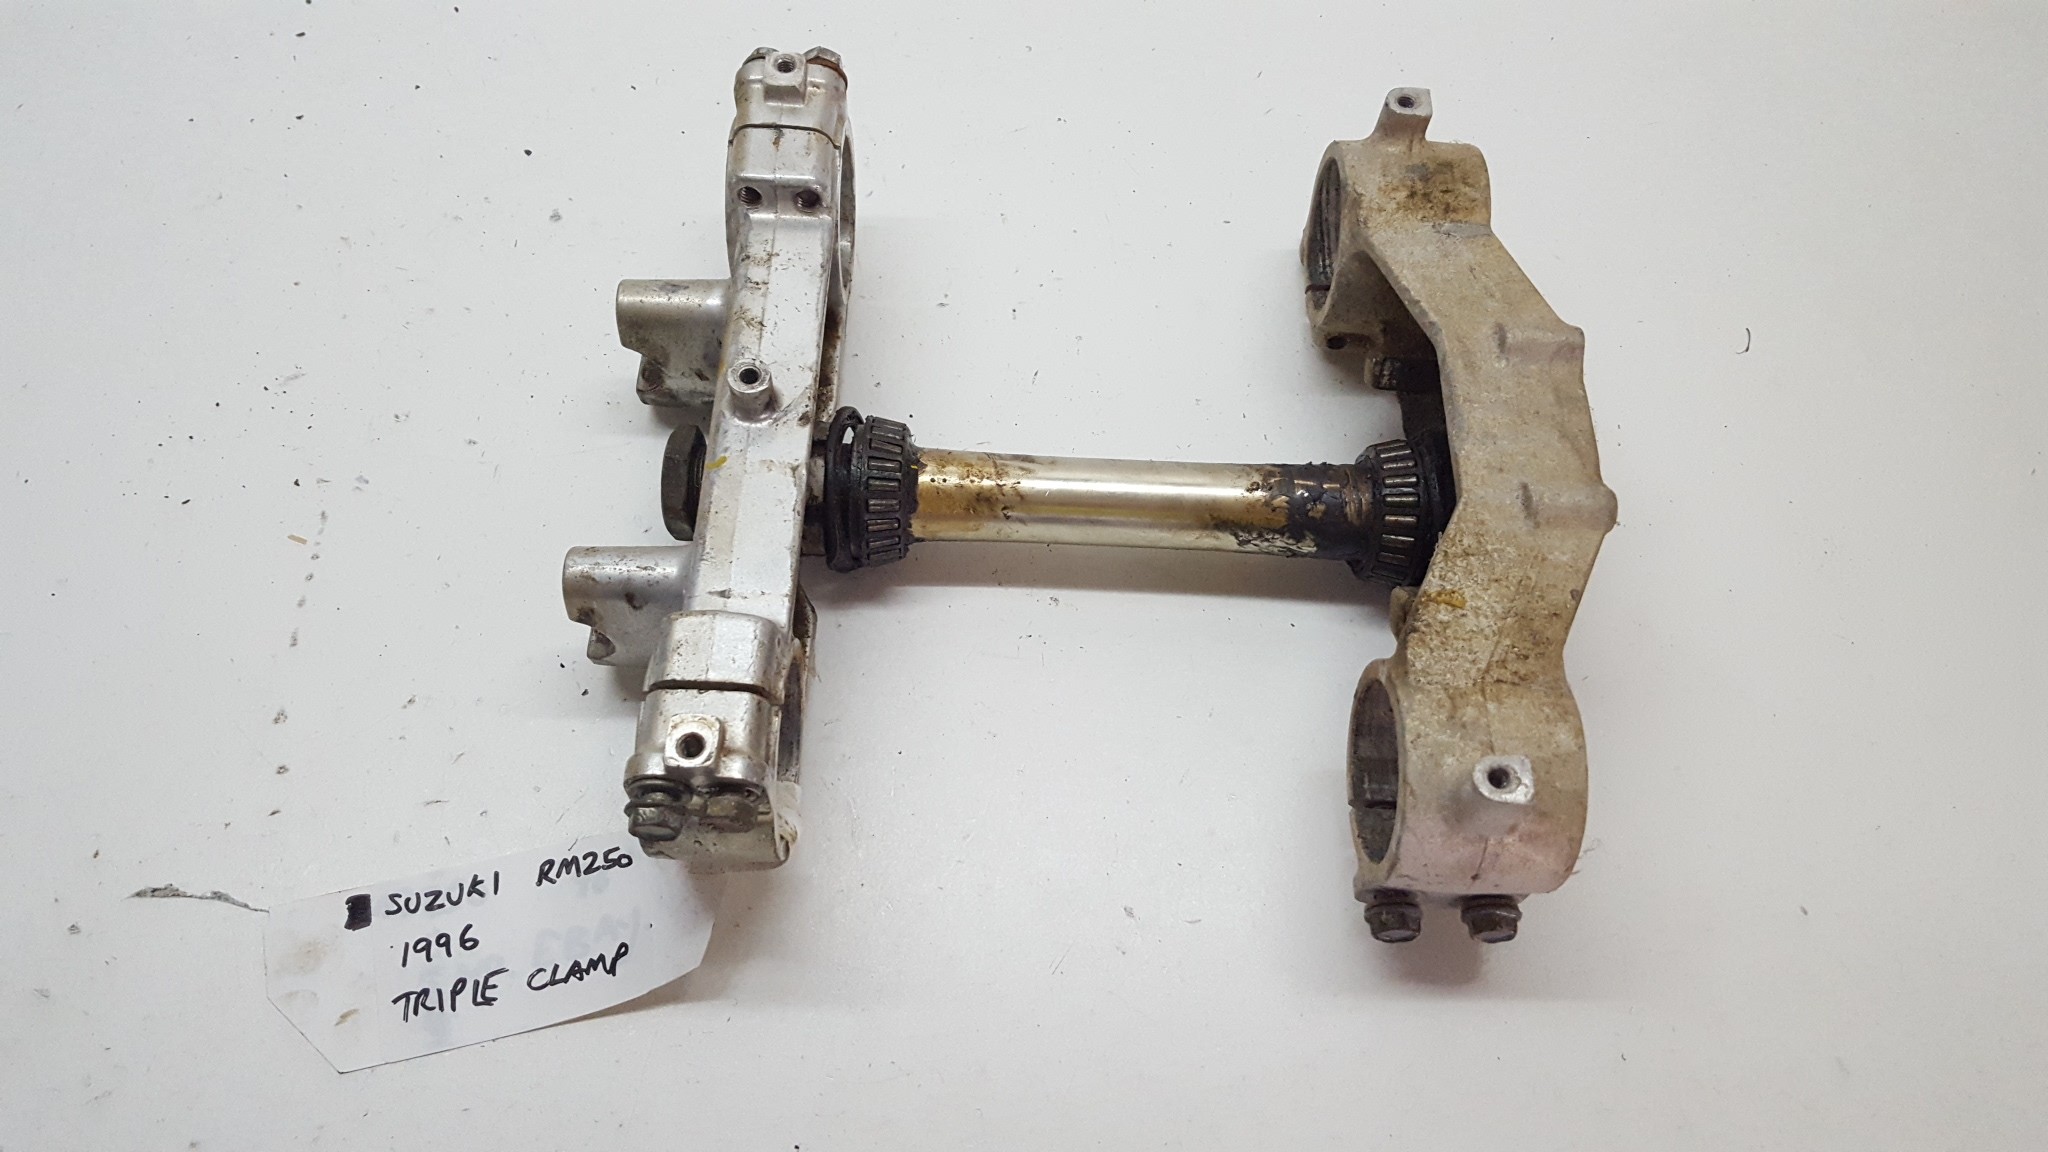 Triple Clamps Steering Stem Tree to suit Suzuki RM250 RM 250 1996 96